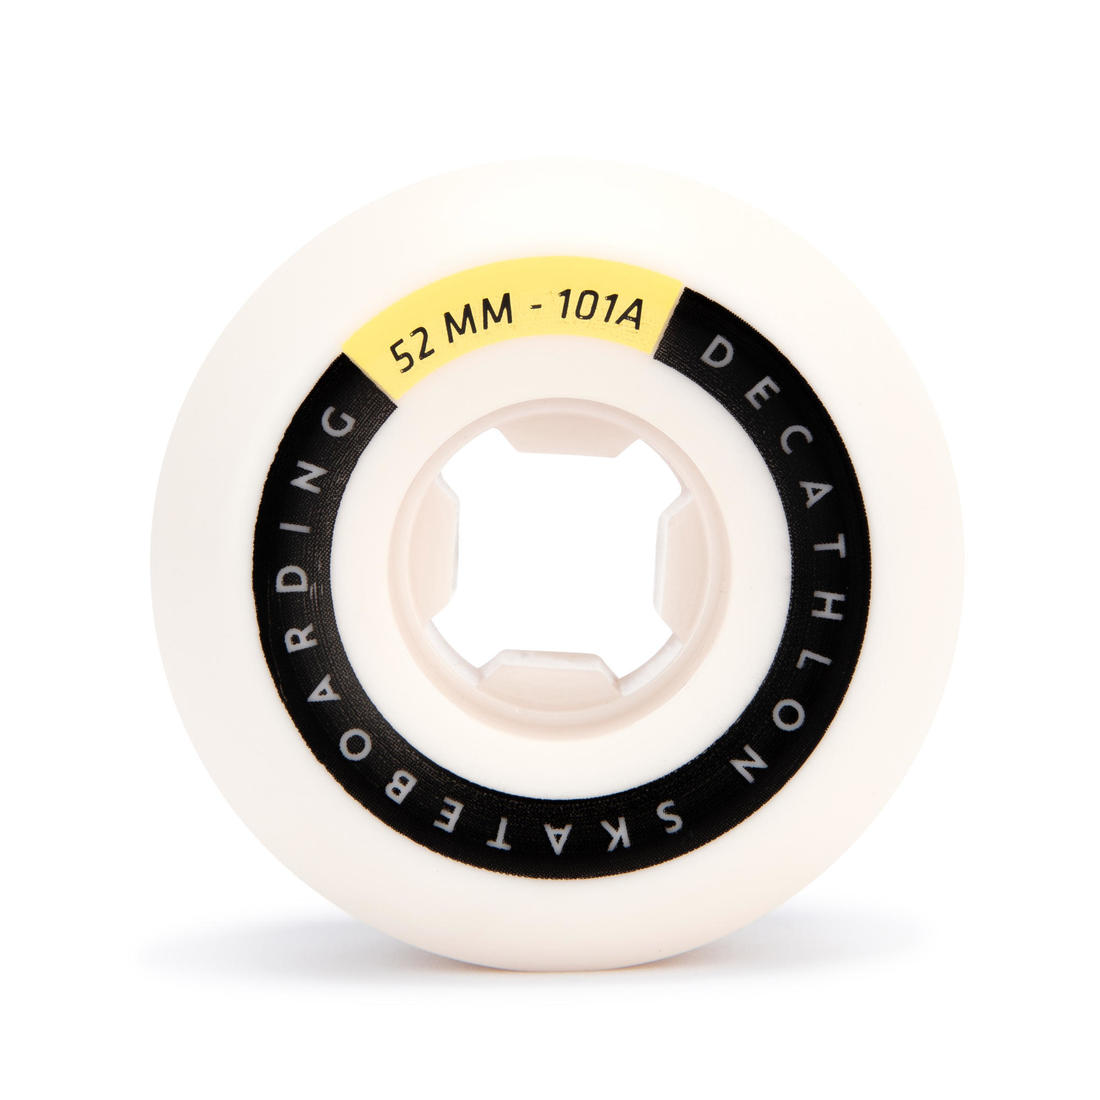 OXELO(オクセロ) スケートボード用ウィール 54mm 101A Conical 4個セット